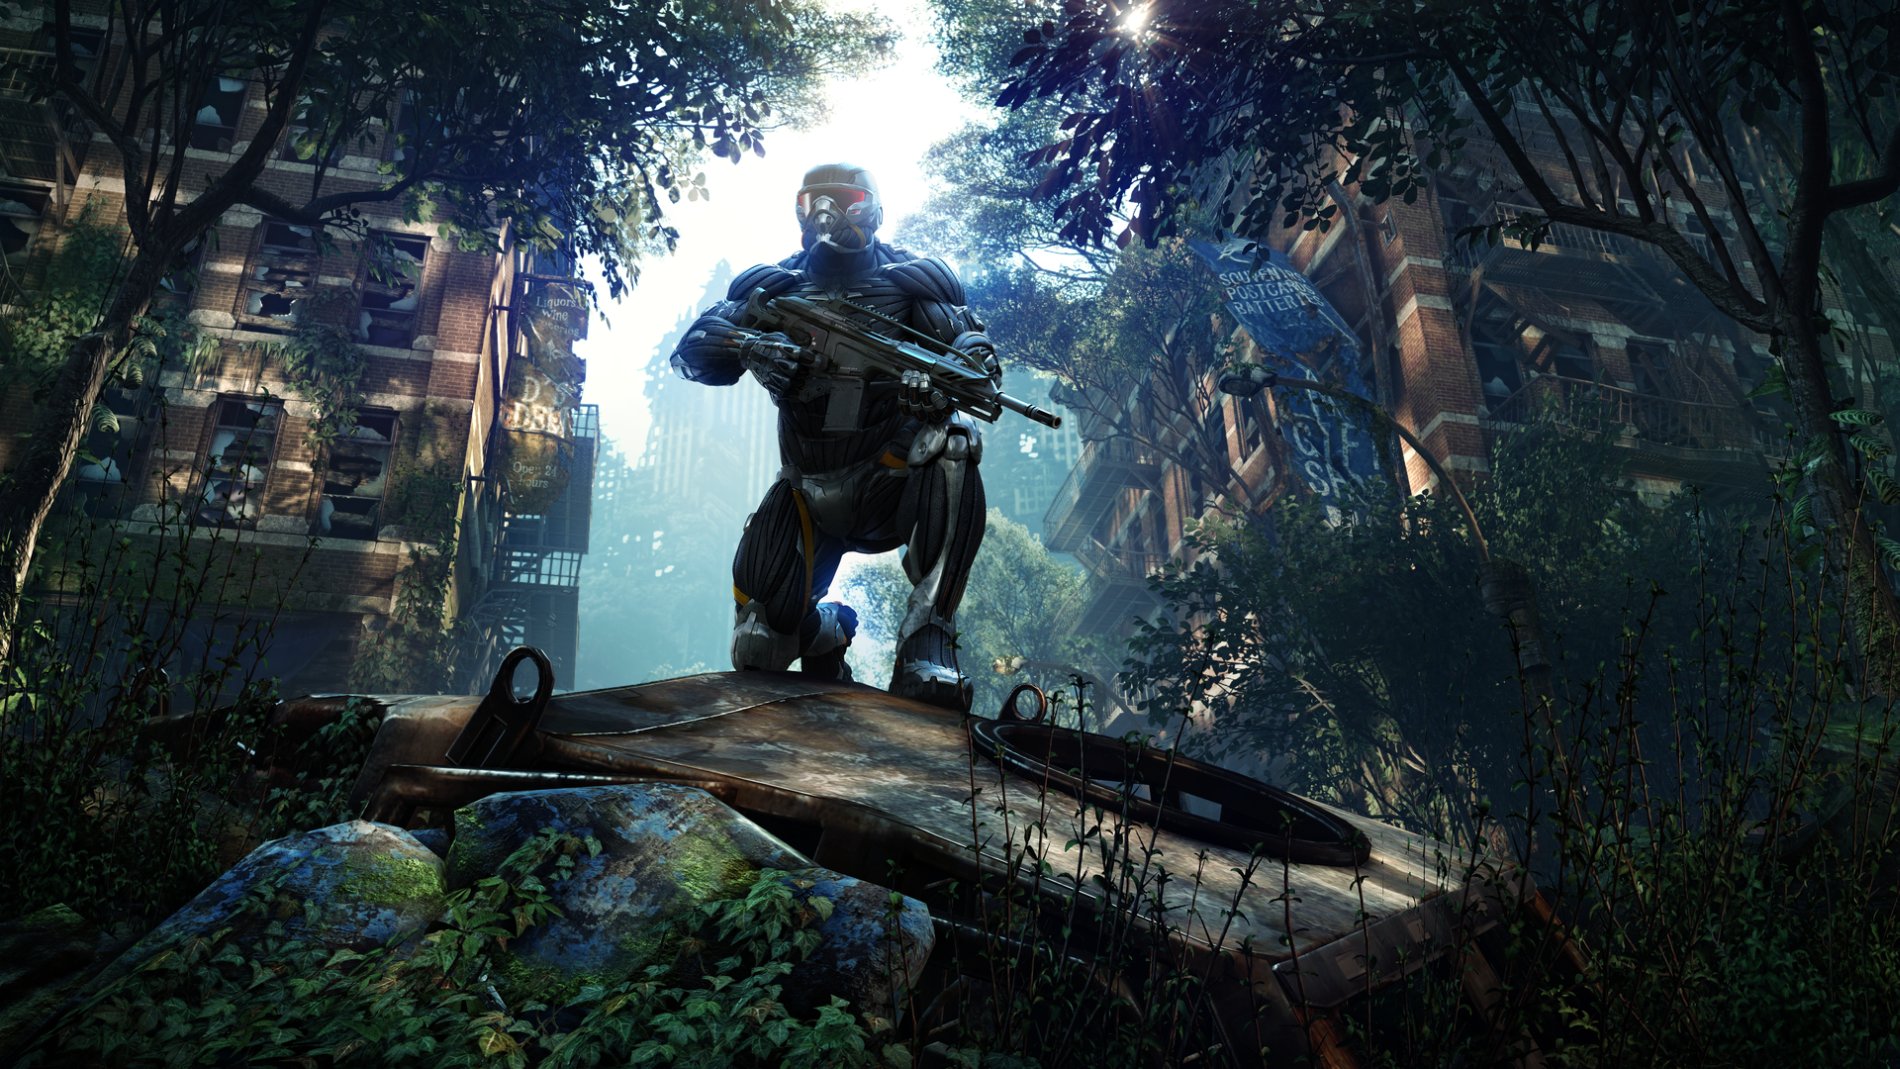 Interview: Mike Read, Producer on Crysis 3